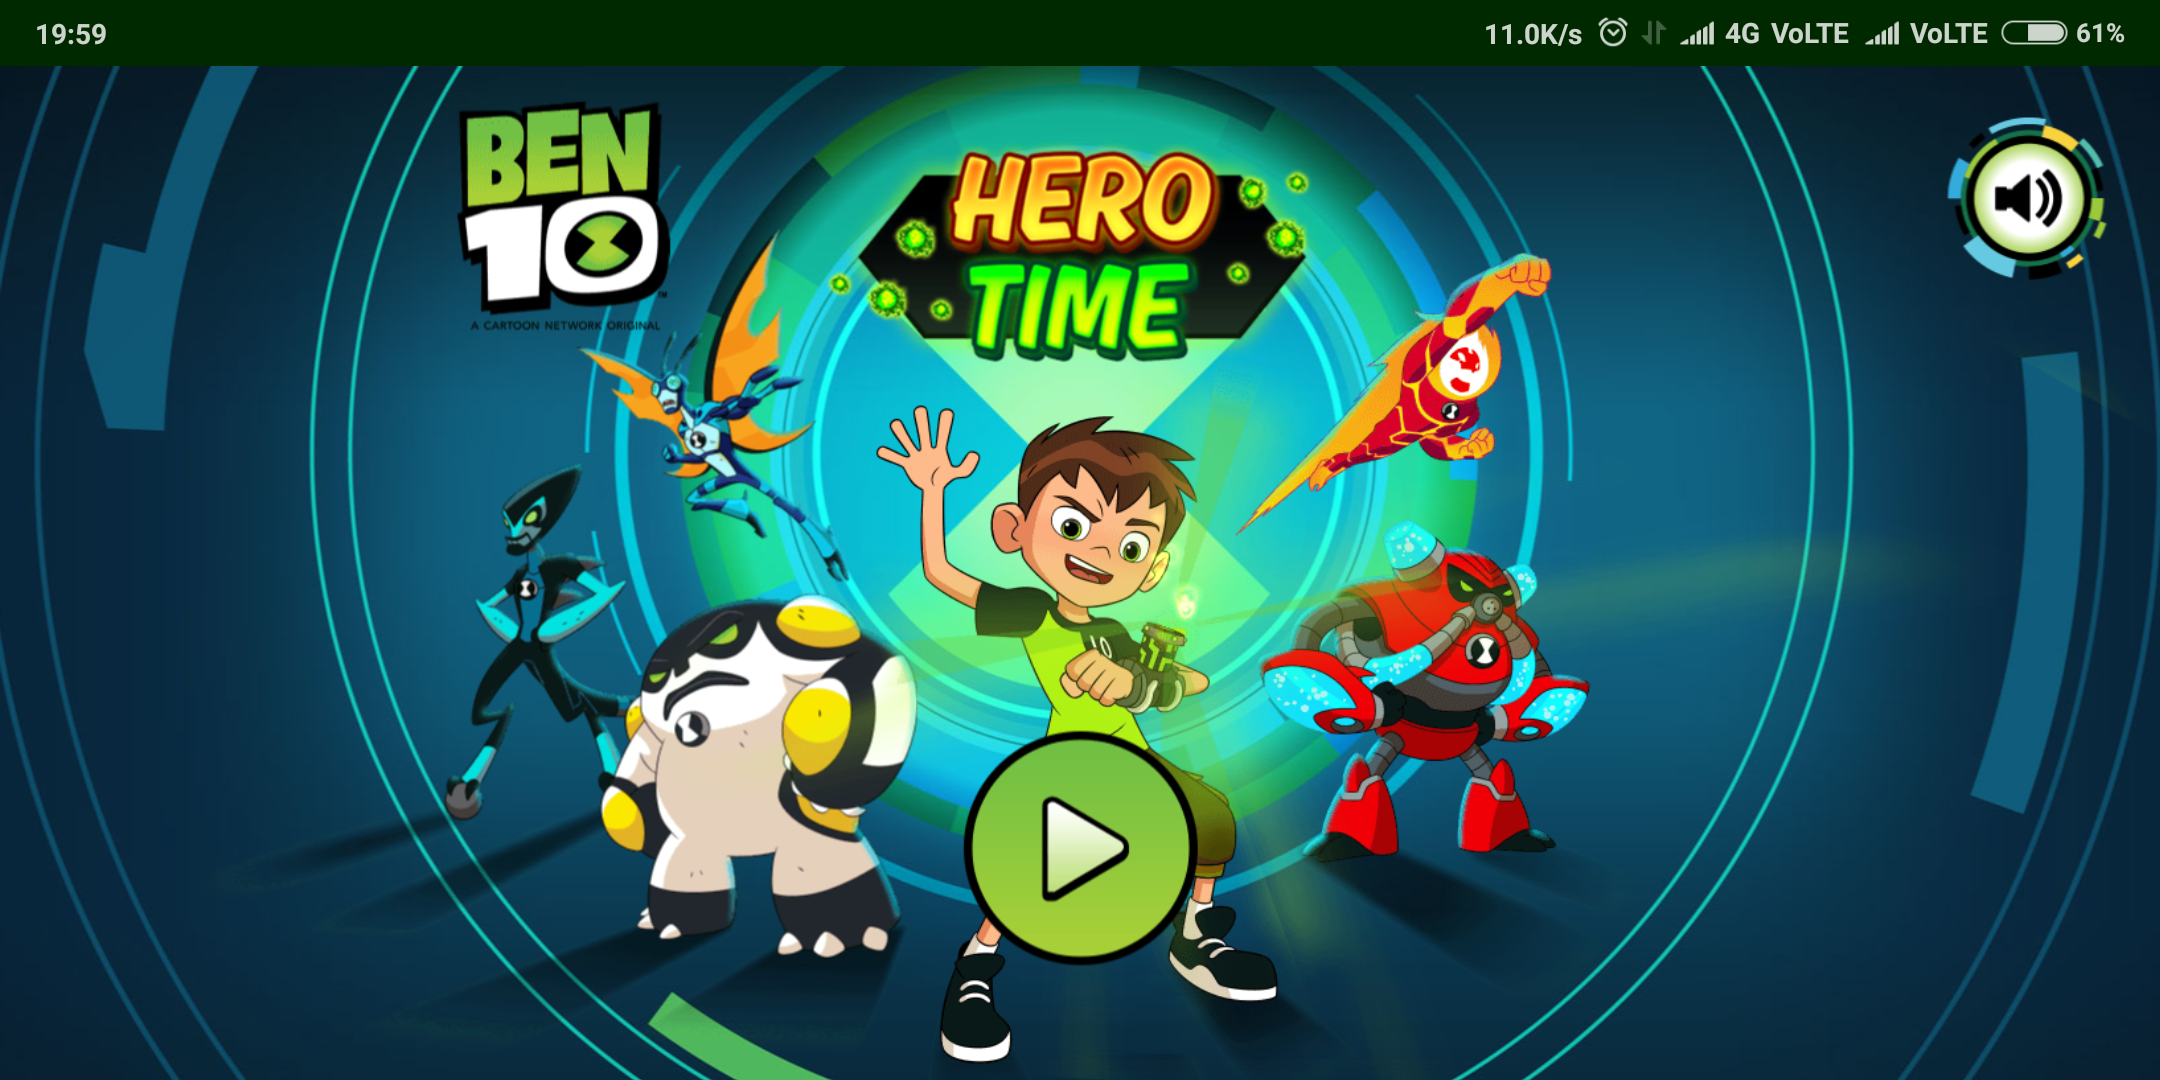 Ben 10 Hero Time Apk 8 2 Download For Android Download Ben 10 Hero Time Apk Latest Version Apkfab Com - ben 10 roblox games for free